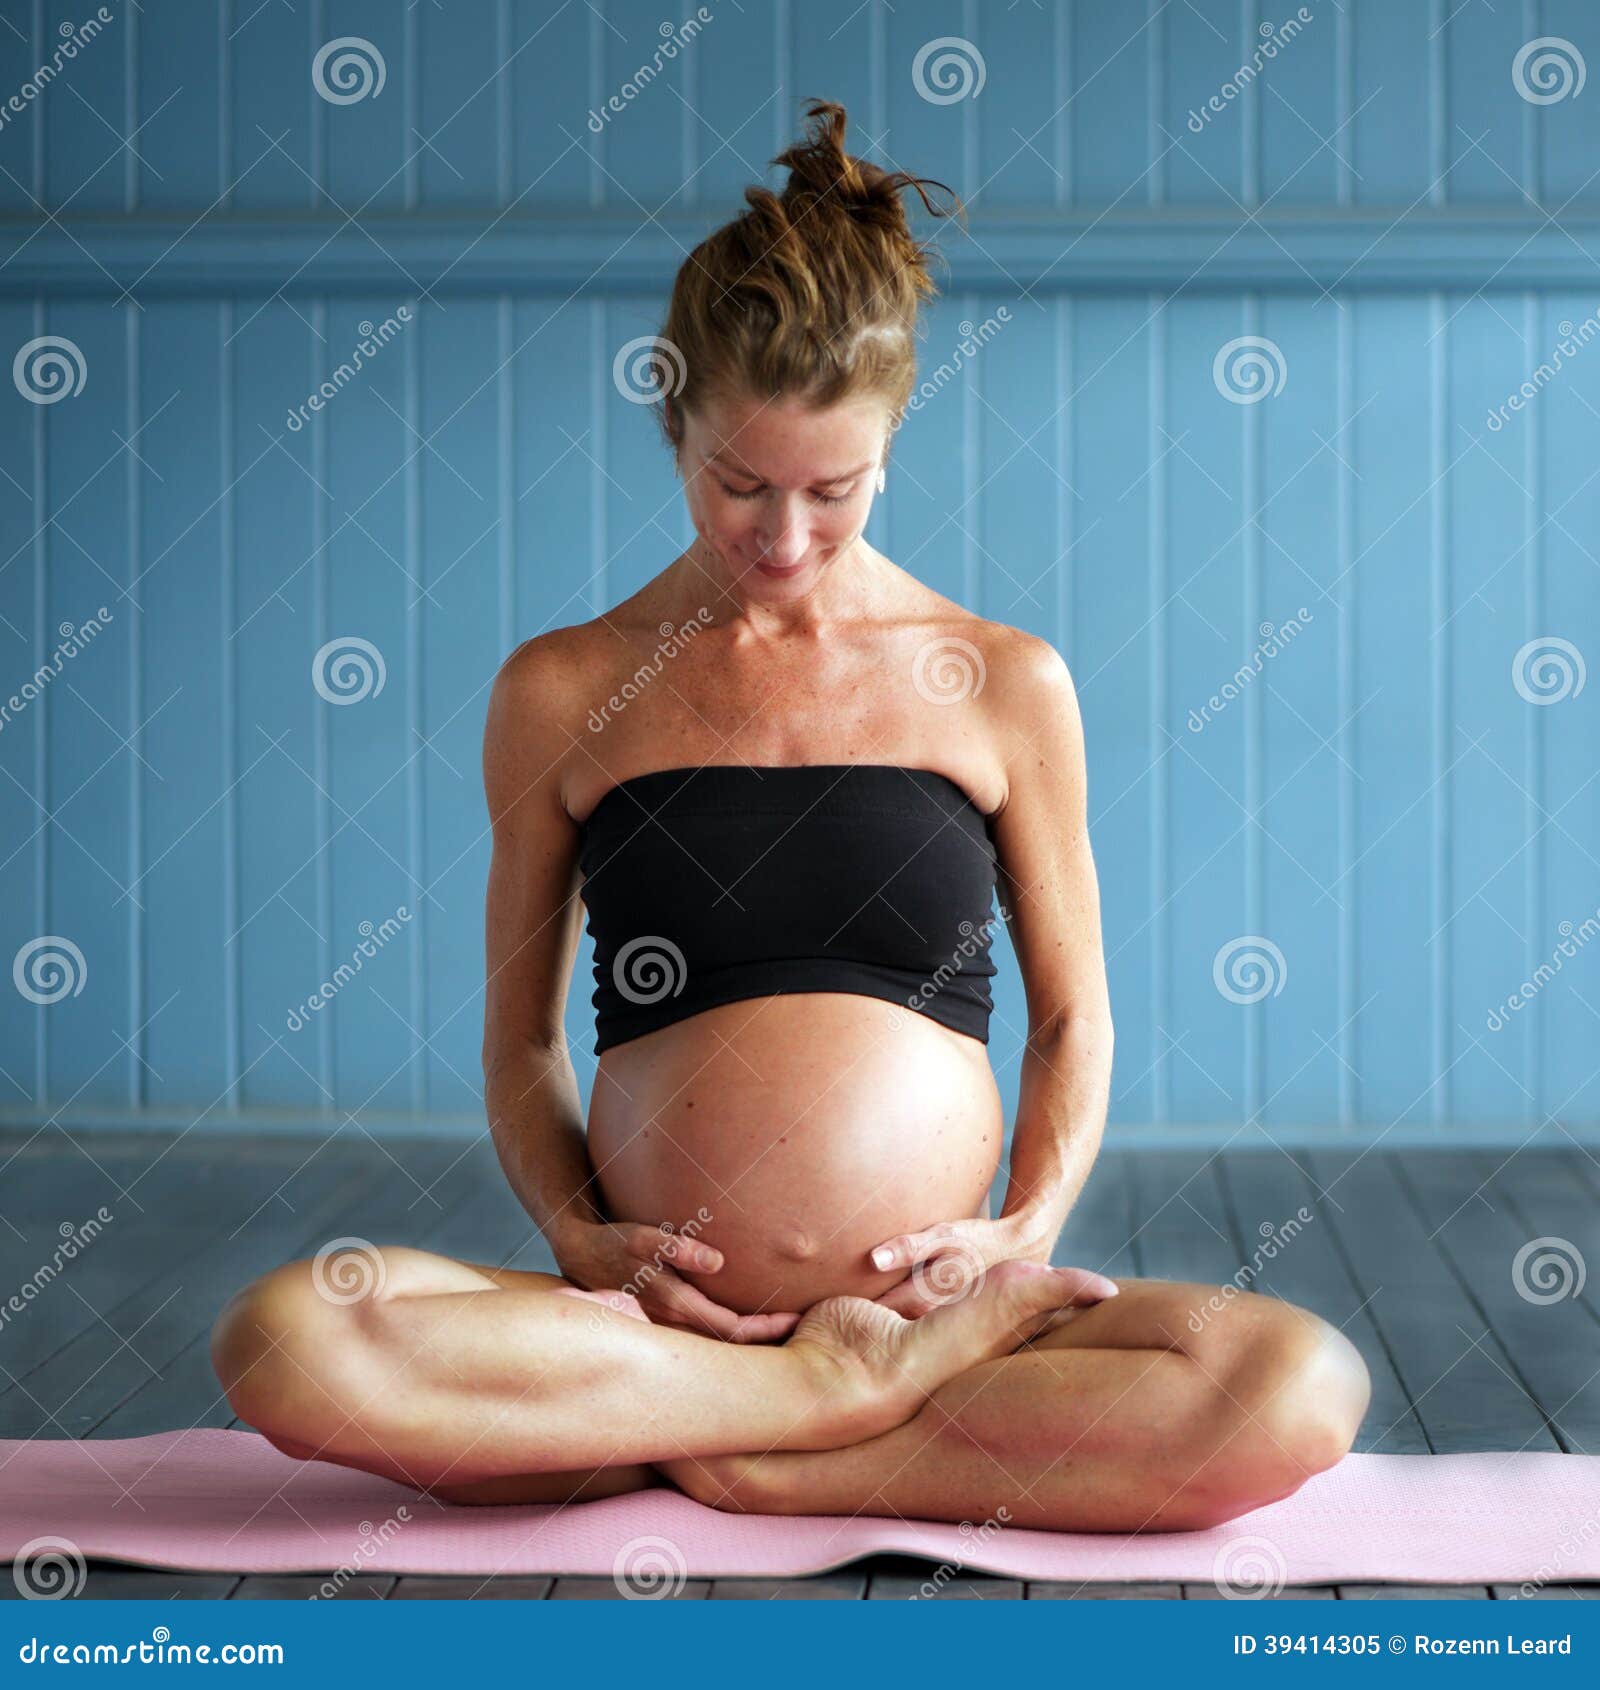 Videos Yoga And Pregnant 78